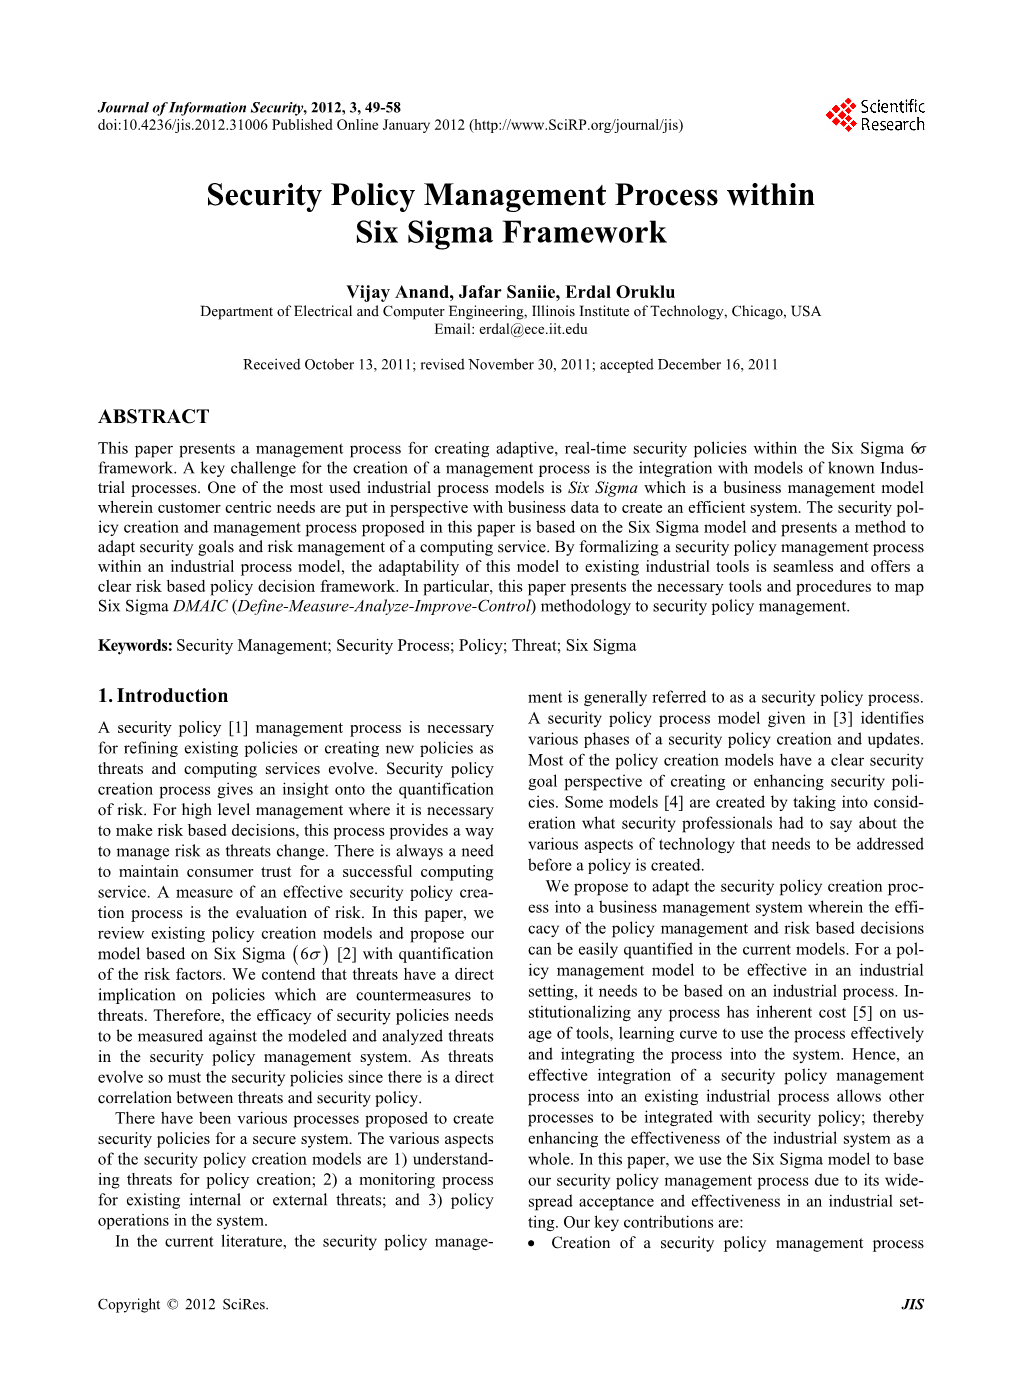 Security Policy Management Process Within Six Sigma Framework